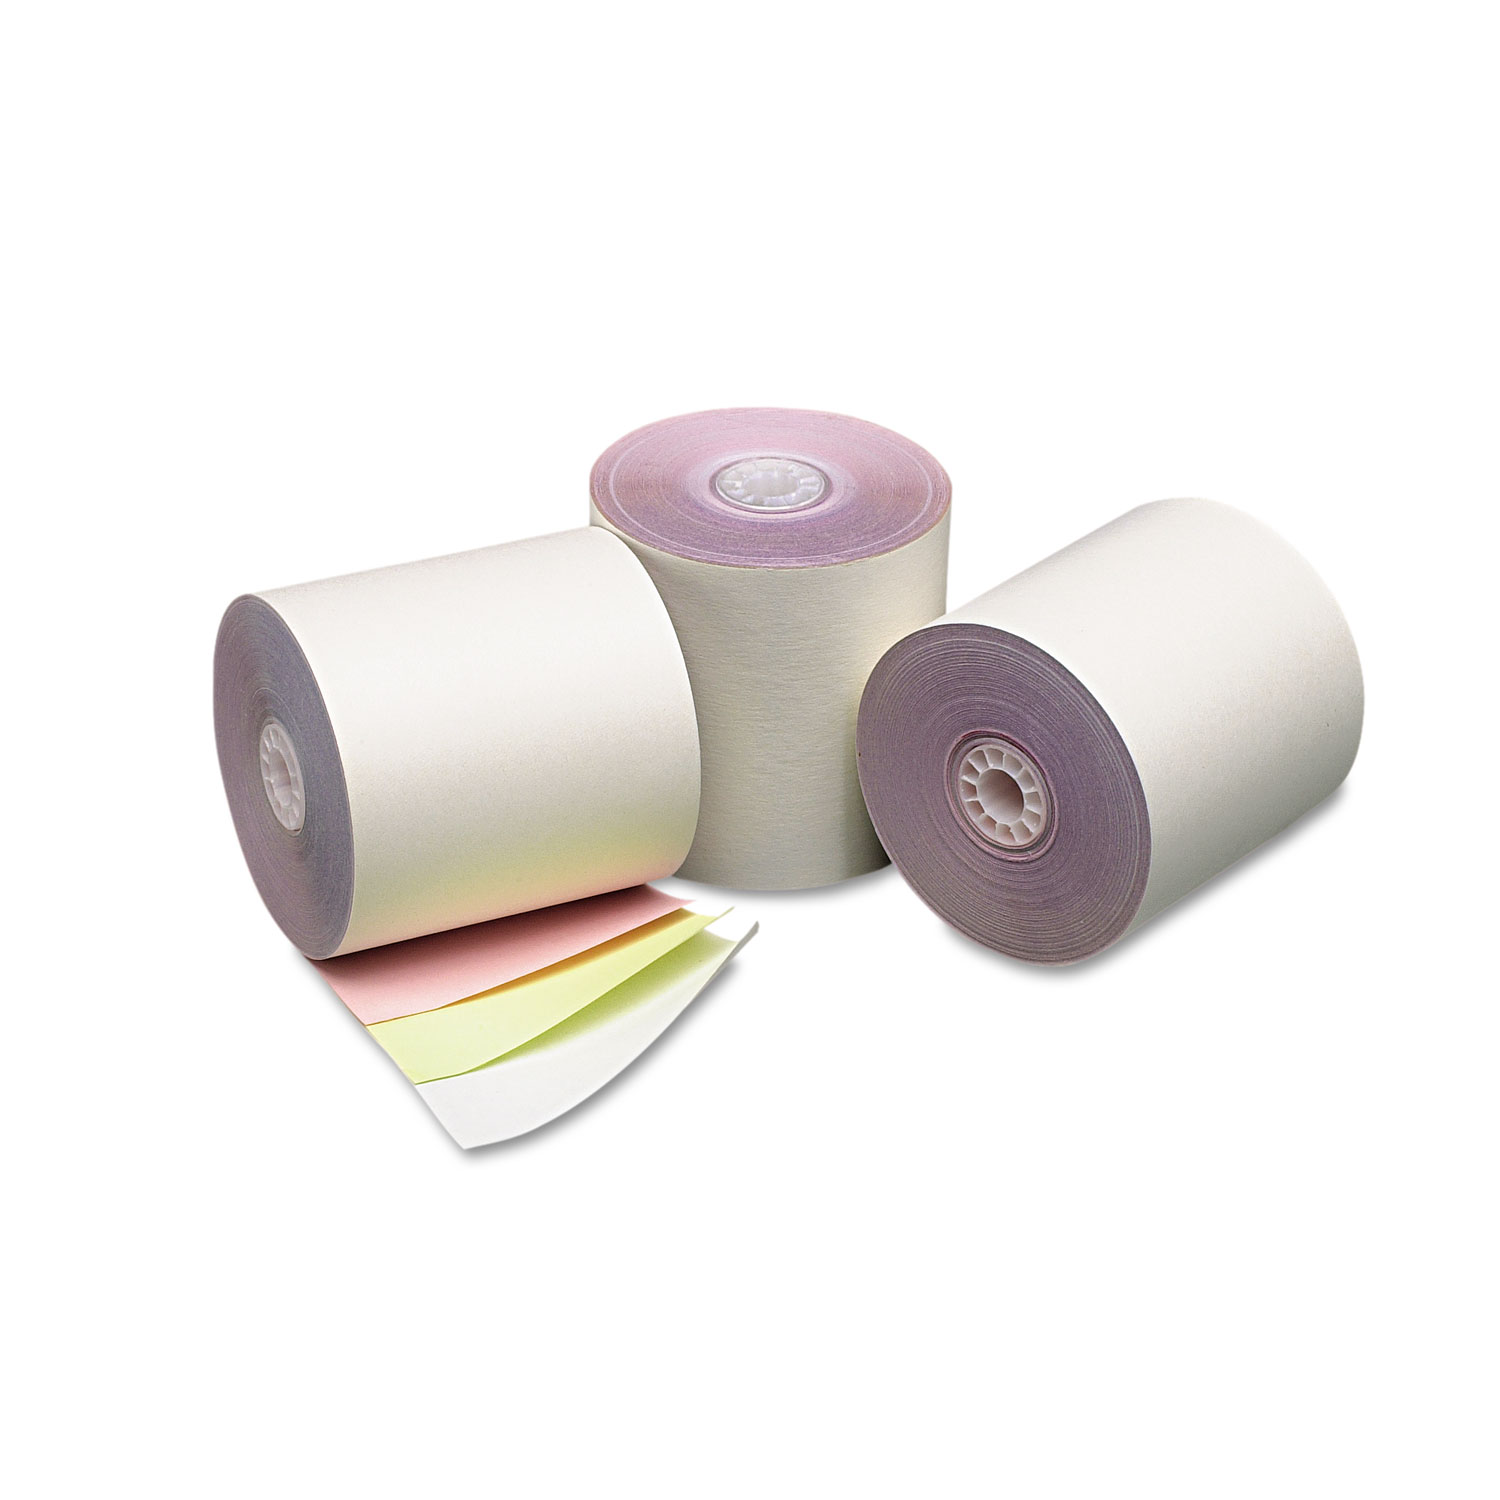  Iconex PMC07638 Impact Printing Carbonless Paper Rolls, 3 x 70 ft, White/Canary/Pink, 50/Carton (ICX90770060) 